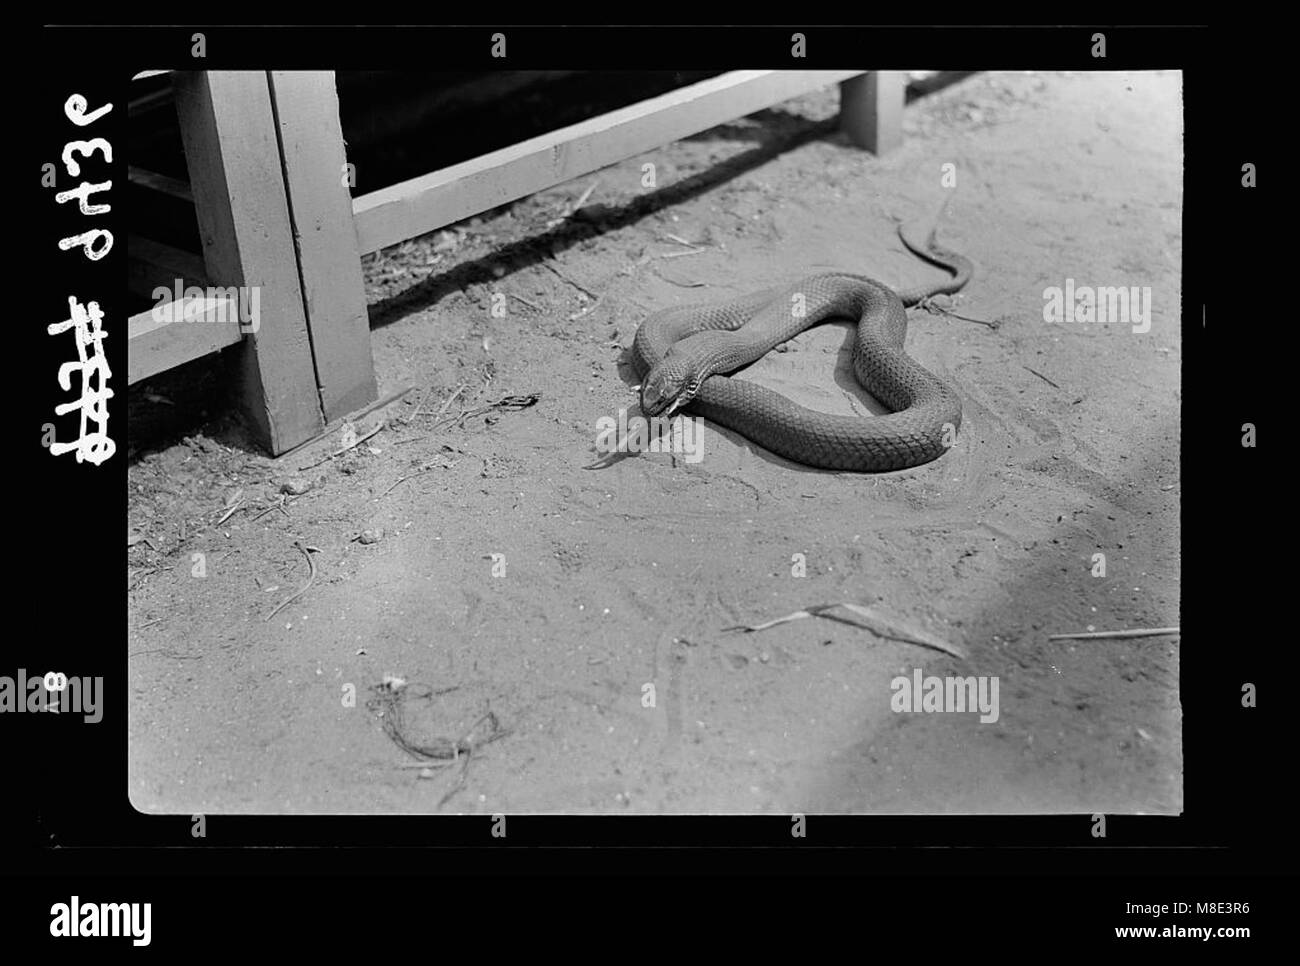 Tel Aviv Zoo. Rat, except for tail, disappeard in mouth of snake LOC matpc.18397 Stock Photo